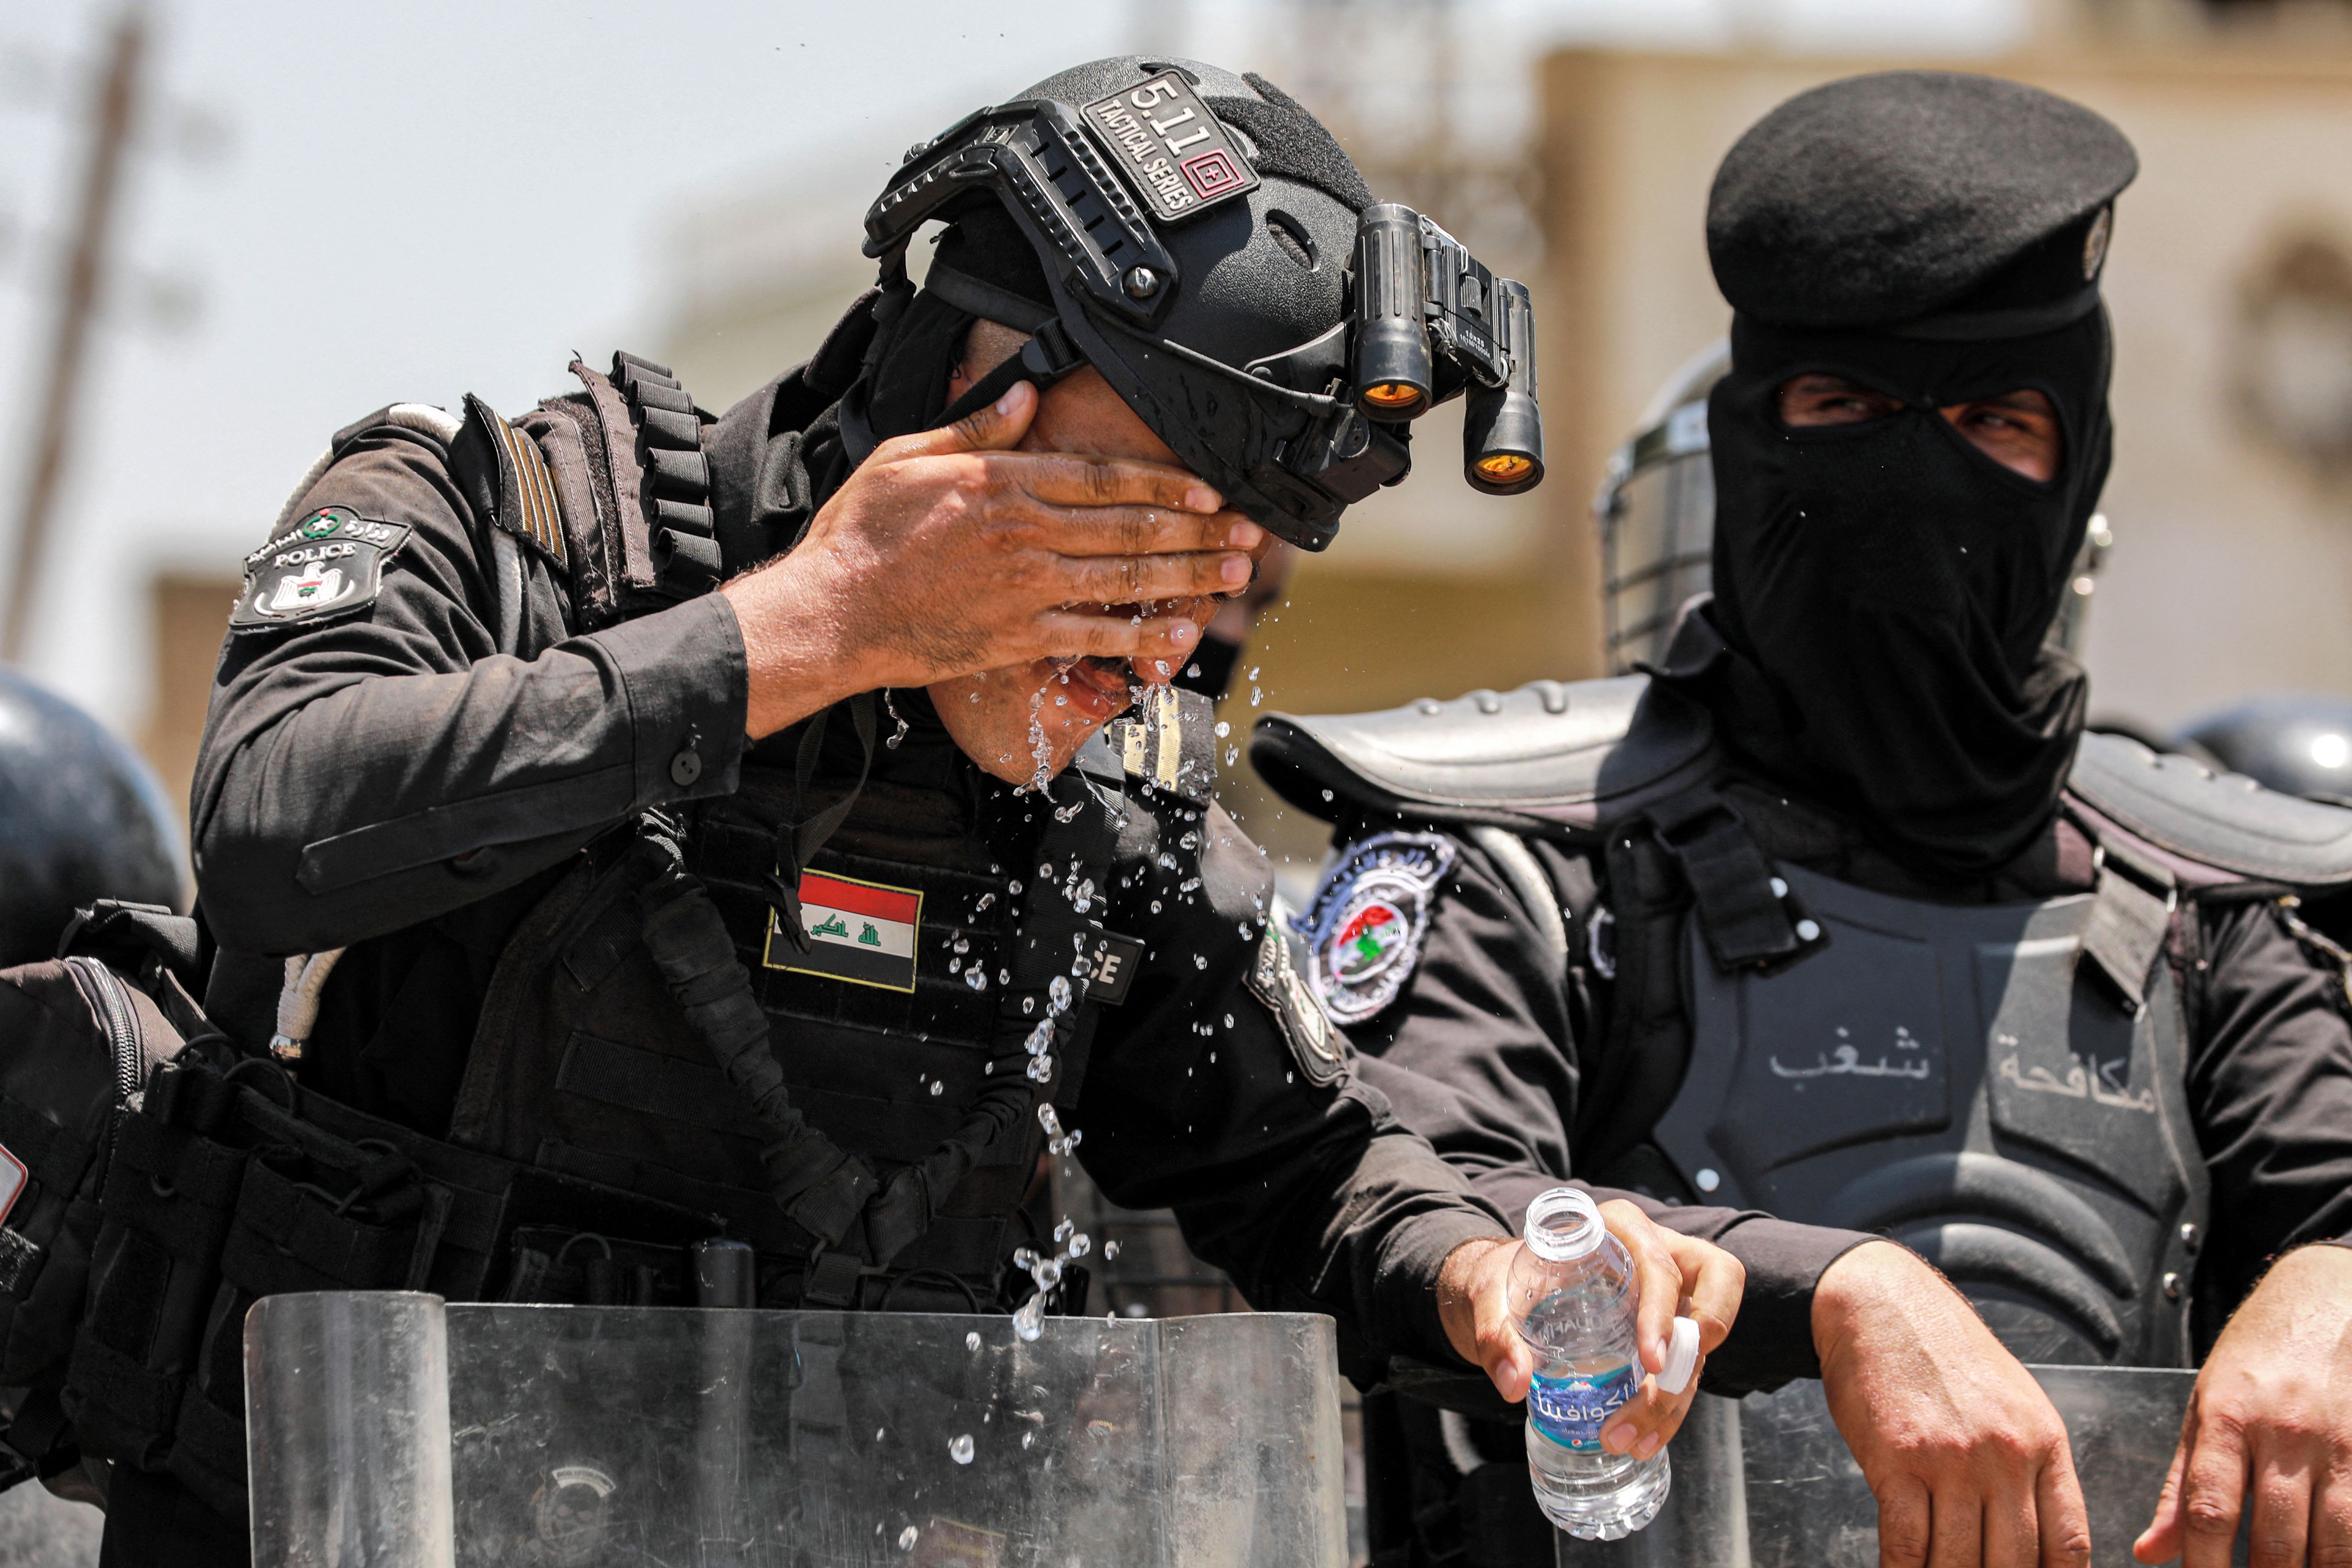 An Iraqi security forces member standing guard at a demonstration against water scarcity and power outages rinses his face with water from a bottle to cool off in Baghdad on July 18, 2023 during a heat wave. Designated by the United Nations as one of the five countries in the world most touched by some effects of climate change, Iraq is experiencing its fourth consecutive summer of drought. In addition to declining rainfall and rising temperatures, Iraqi authorities say upstream dam construction by Turkey and Iran has affected the volume of water in the Tigris and Euphrates rivers through Iraq. 